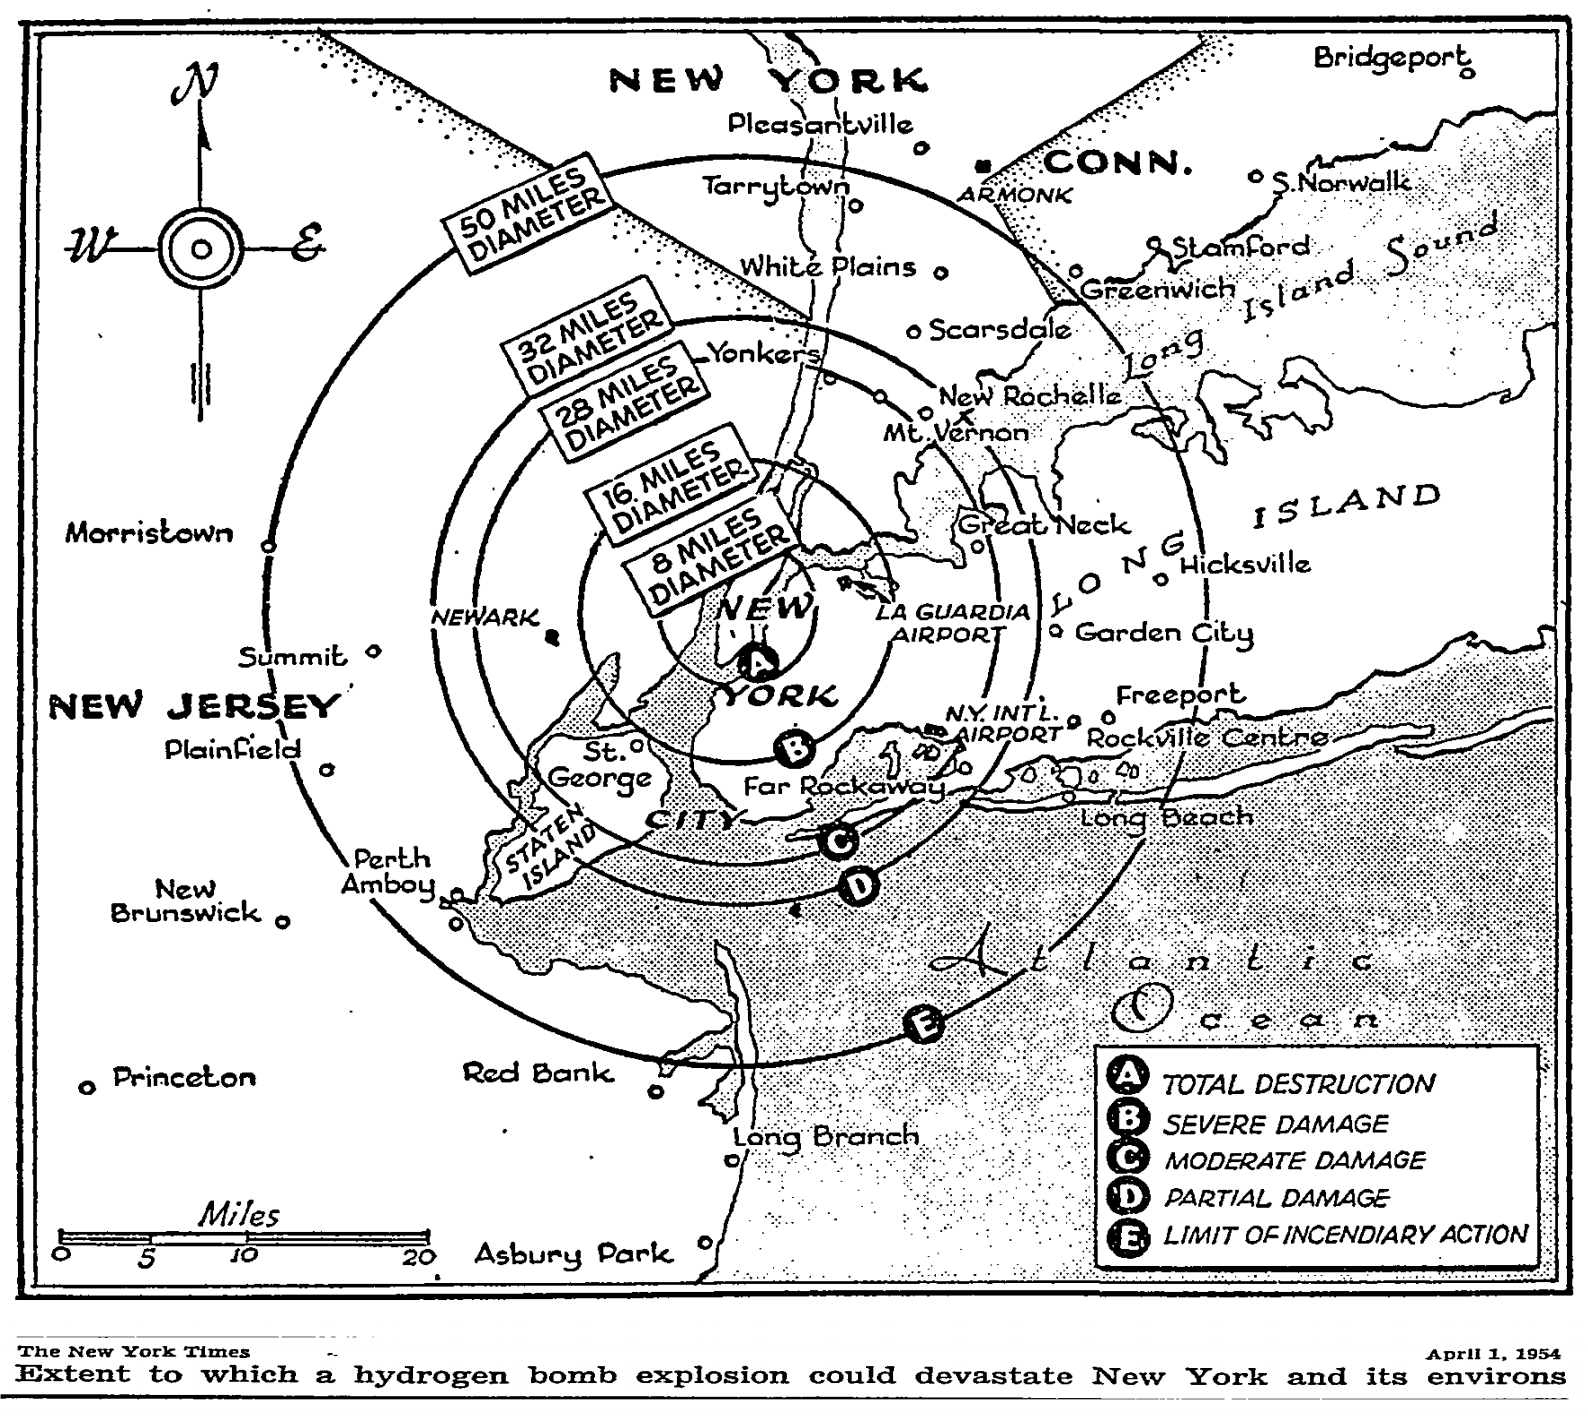 A map shows the extent to which a hydrogen bomb could devastate the New York, New Jersey, Connecticut tri-state area